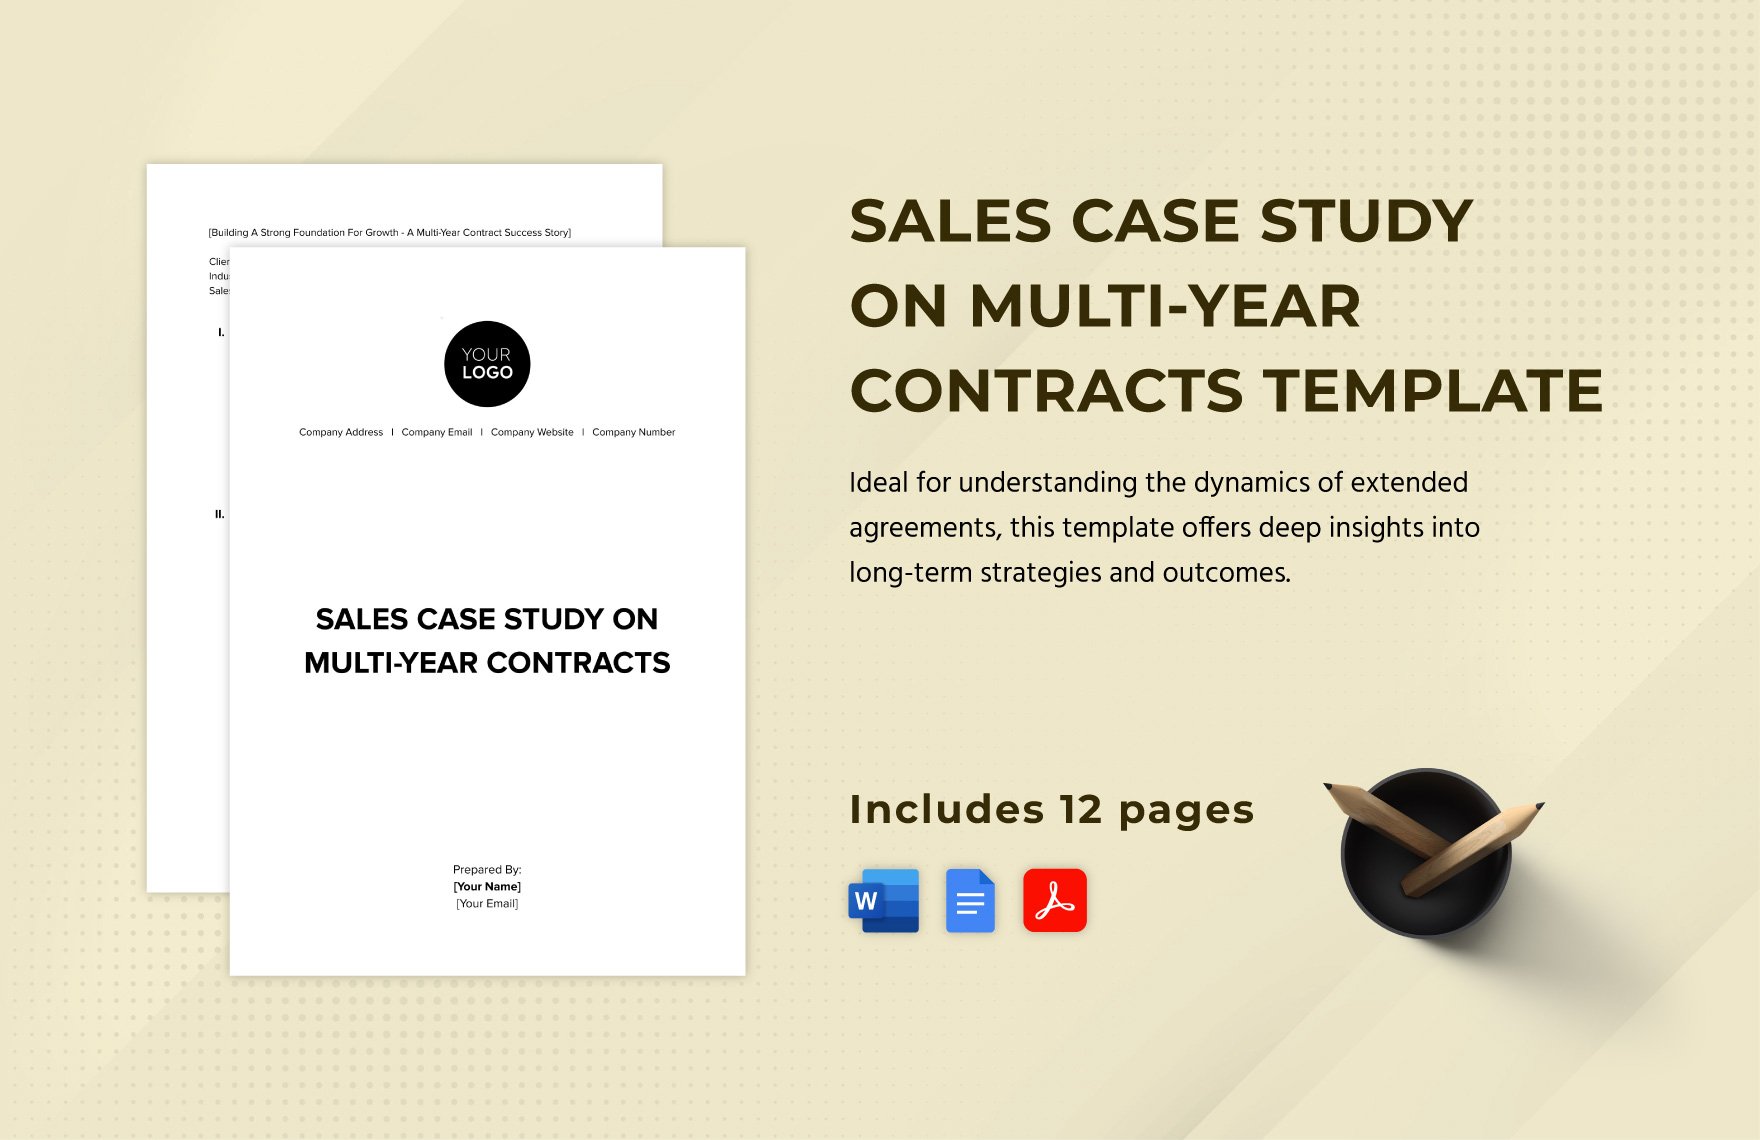 Sales Case Study on Multi-Year Contracts Template